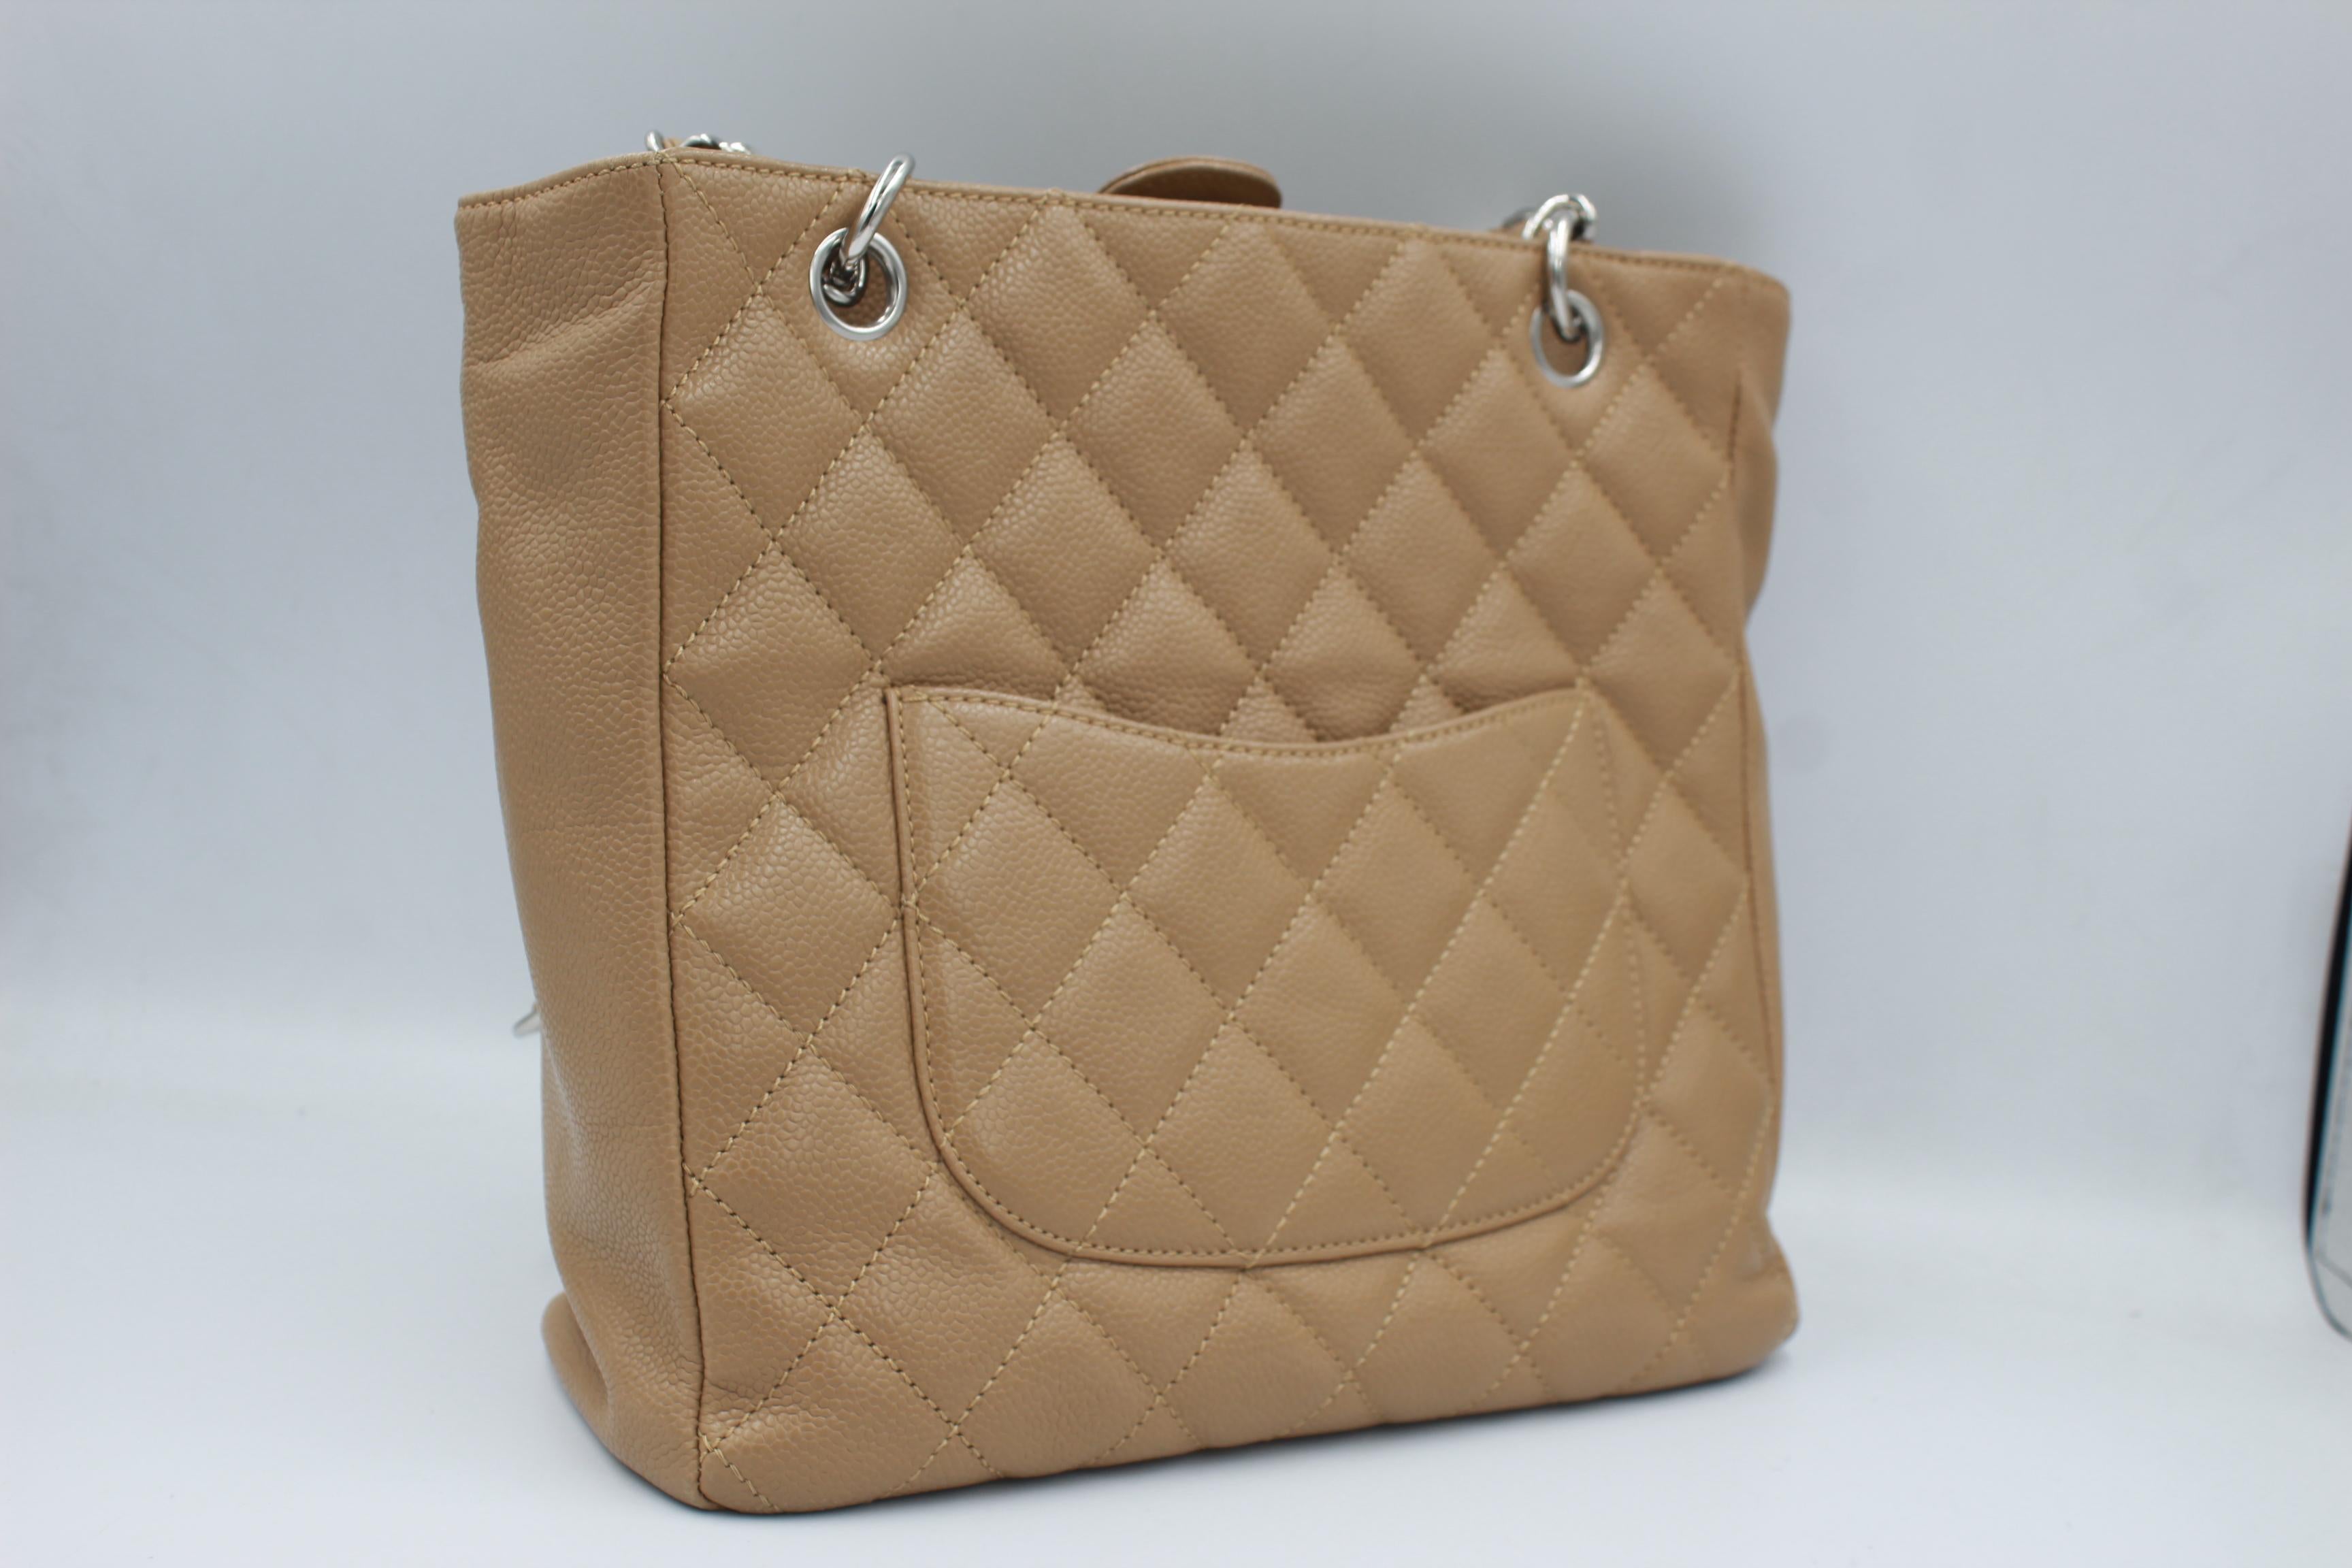 Chanel bag in leather.
Beige / Light brown leather.
Top handle bag, can be worn under the shoulder.
Good condition.
24Cm x 24cm x 8cm